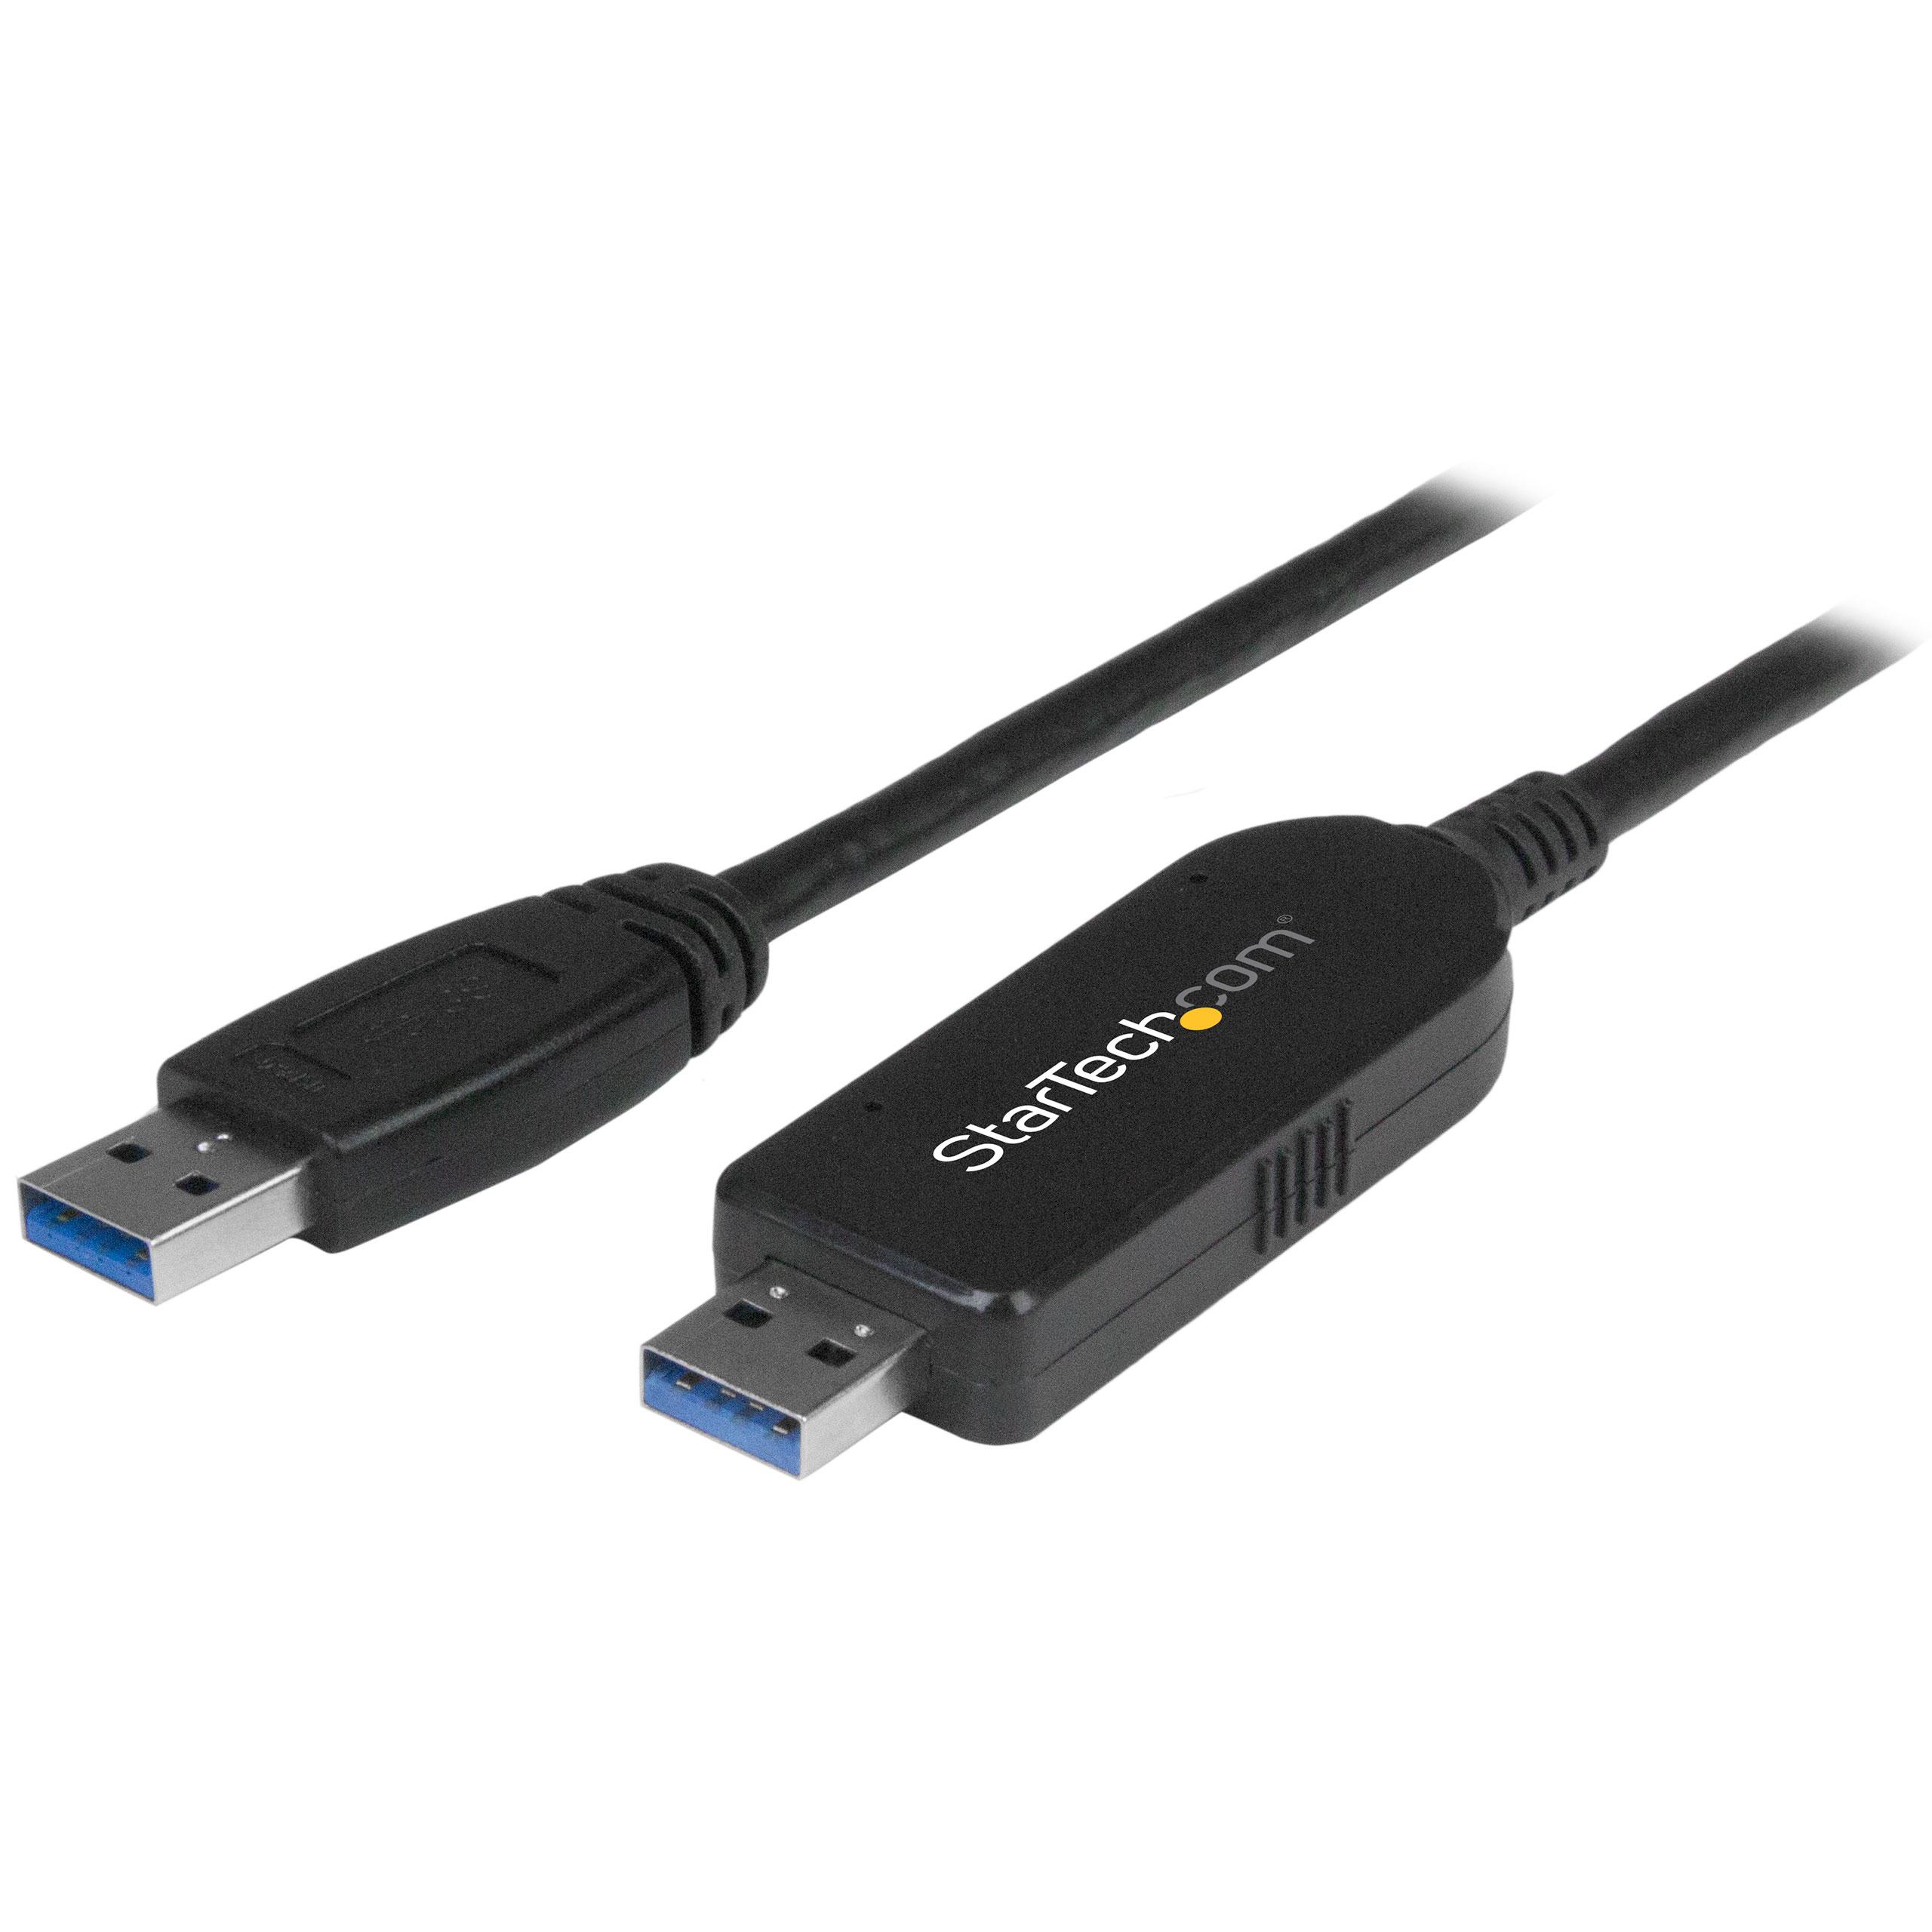 Dku-5 Data Cable Drivers For Mac